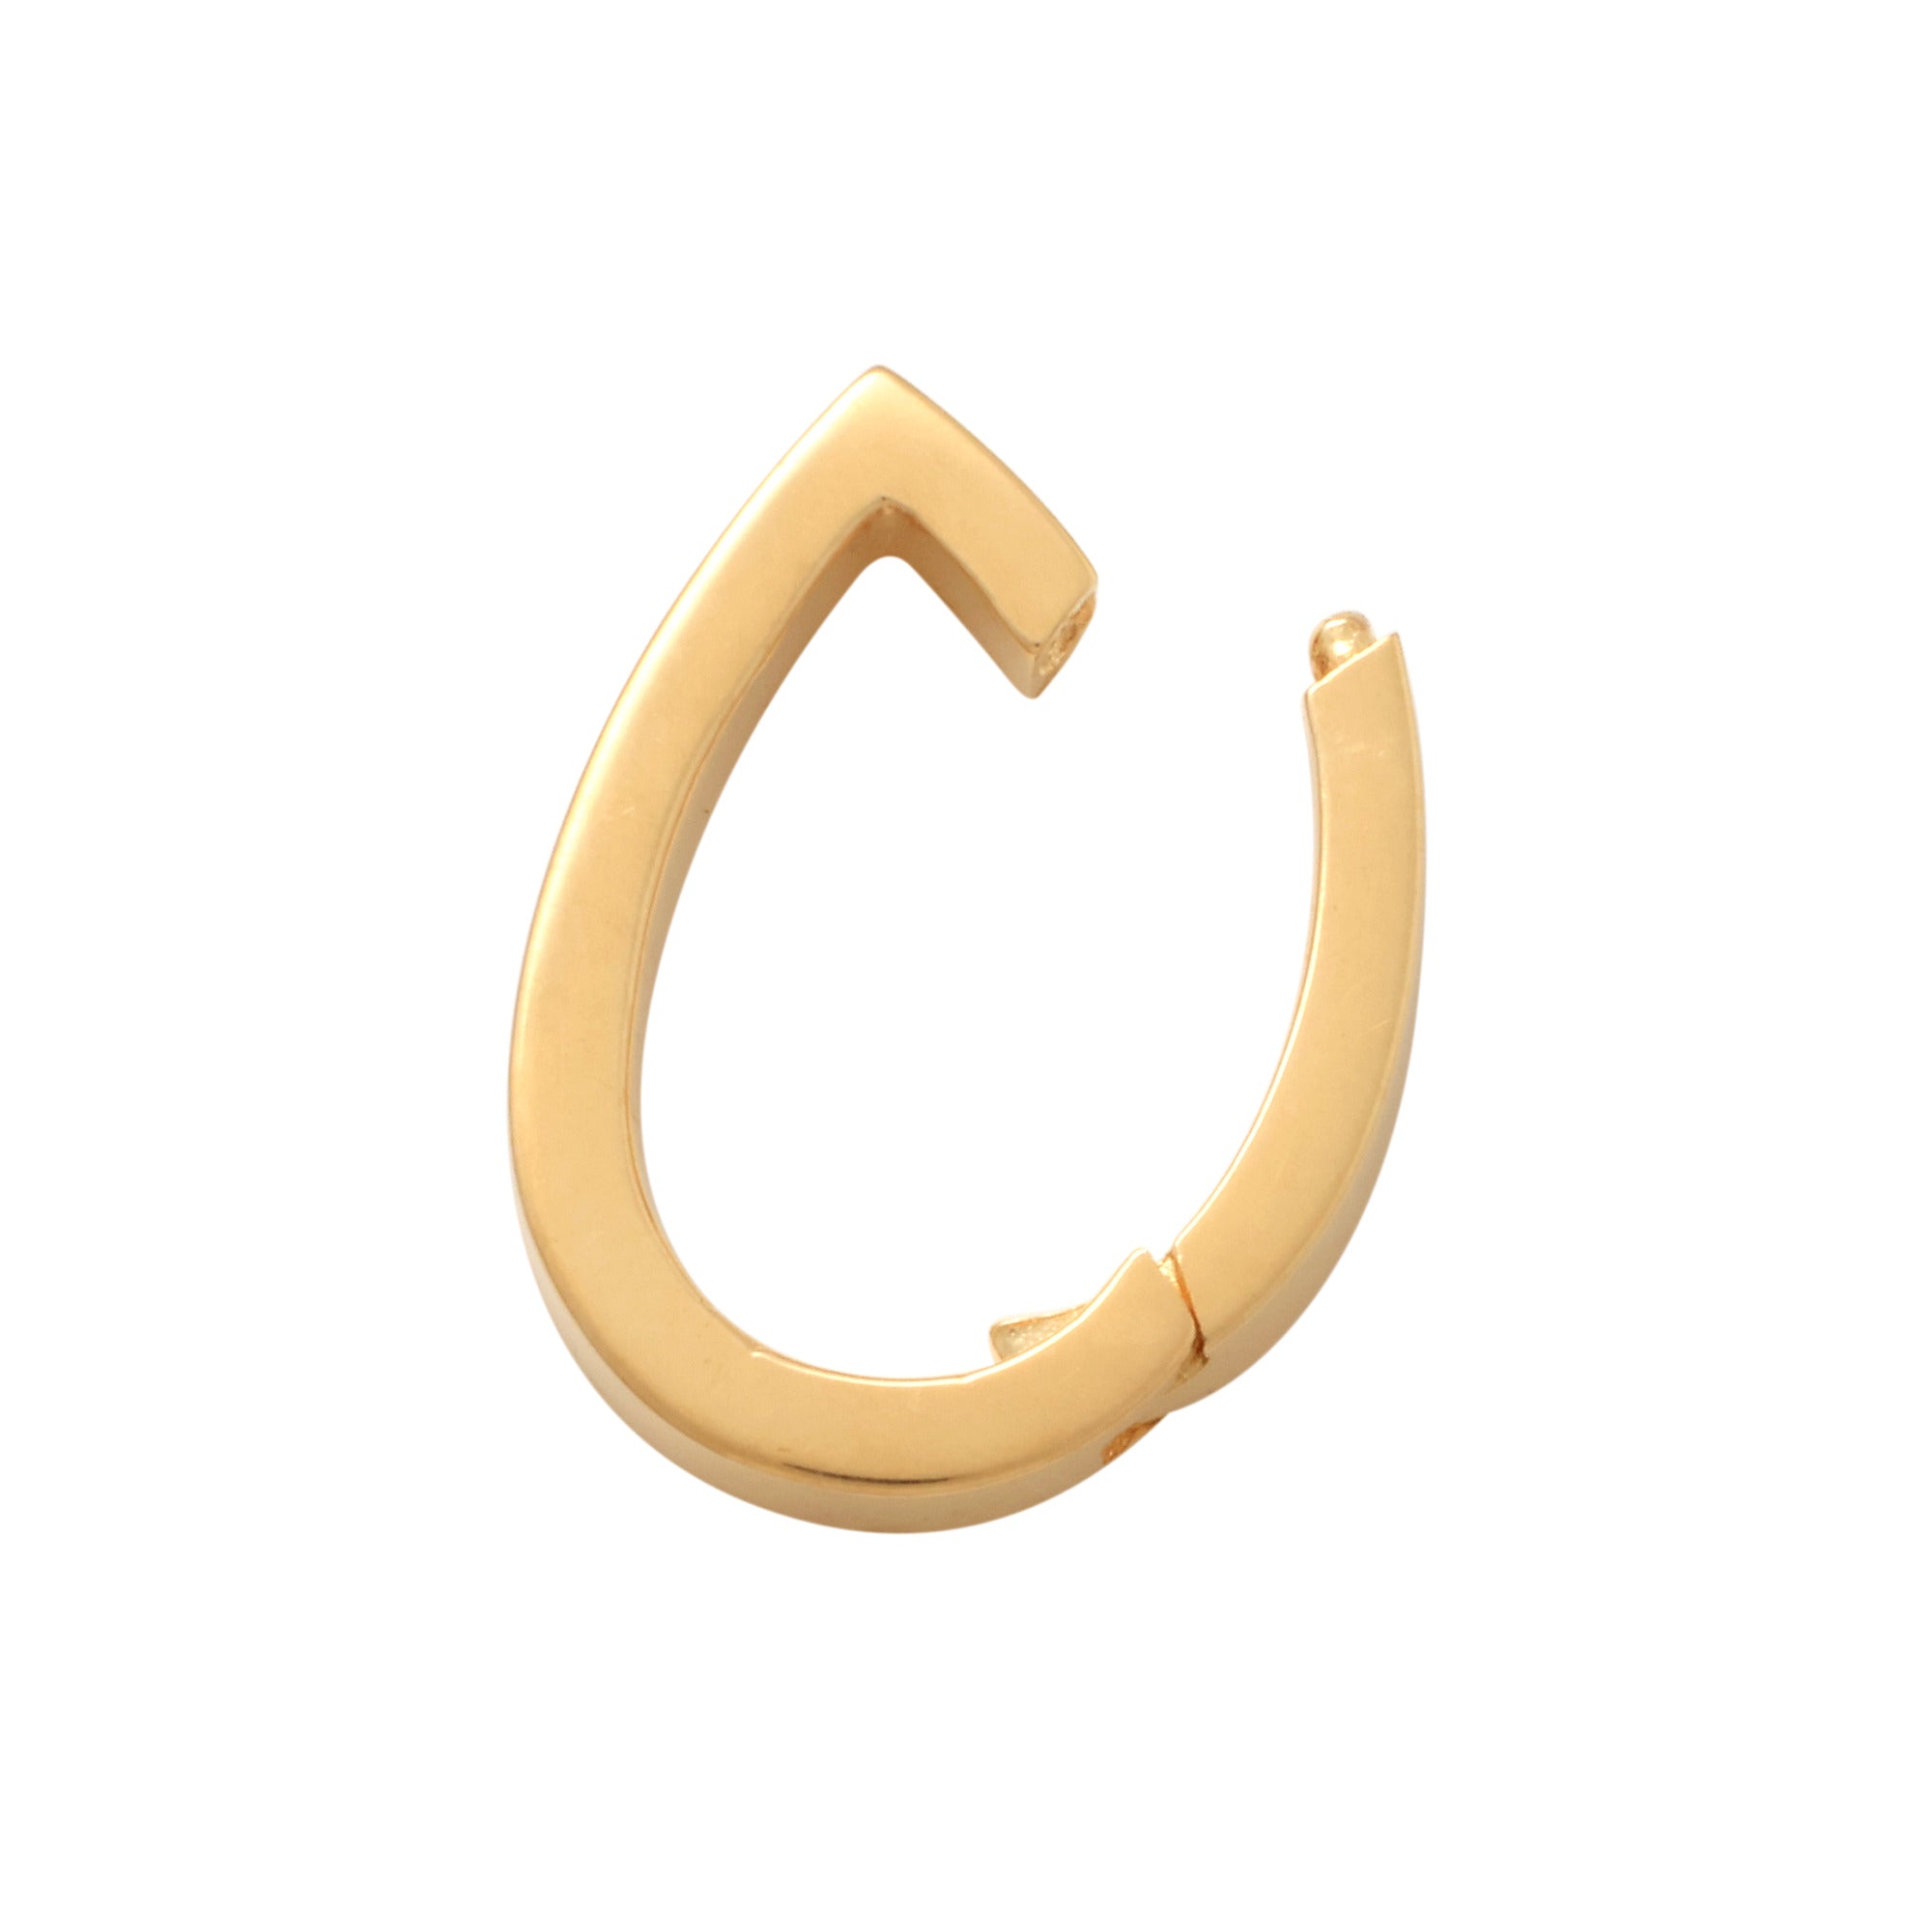 14K Solid Gold Teardrop Shaped Charm Enhancer Connector, Durable Carabiner Clasp - Anygolds